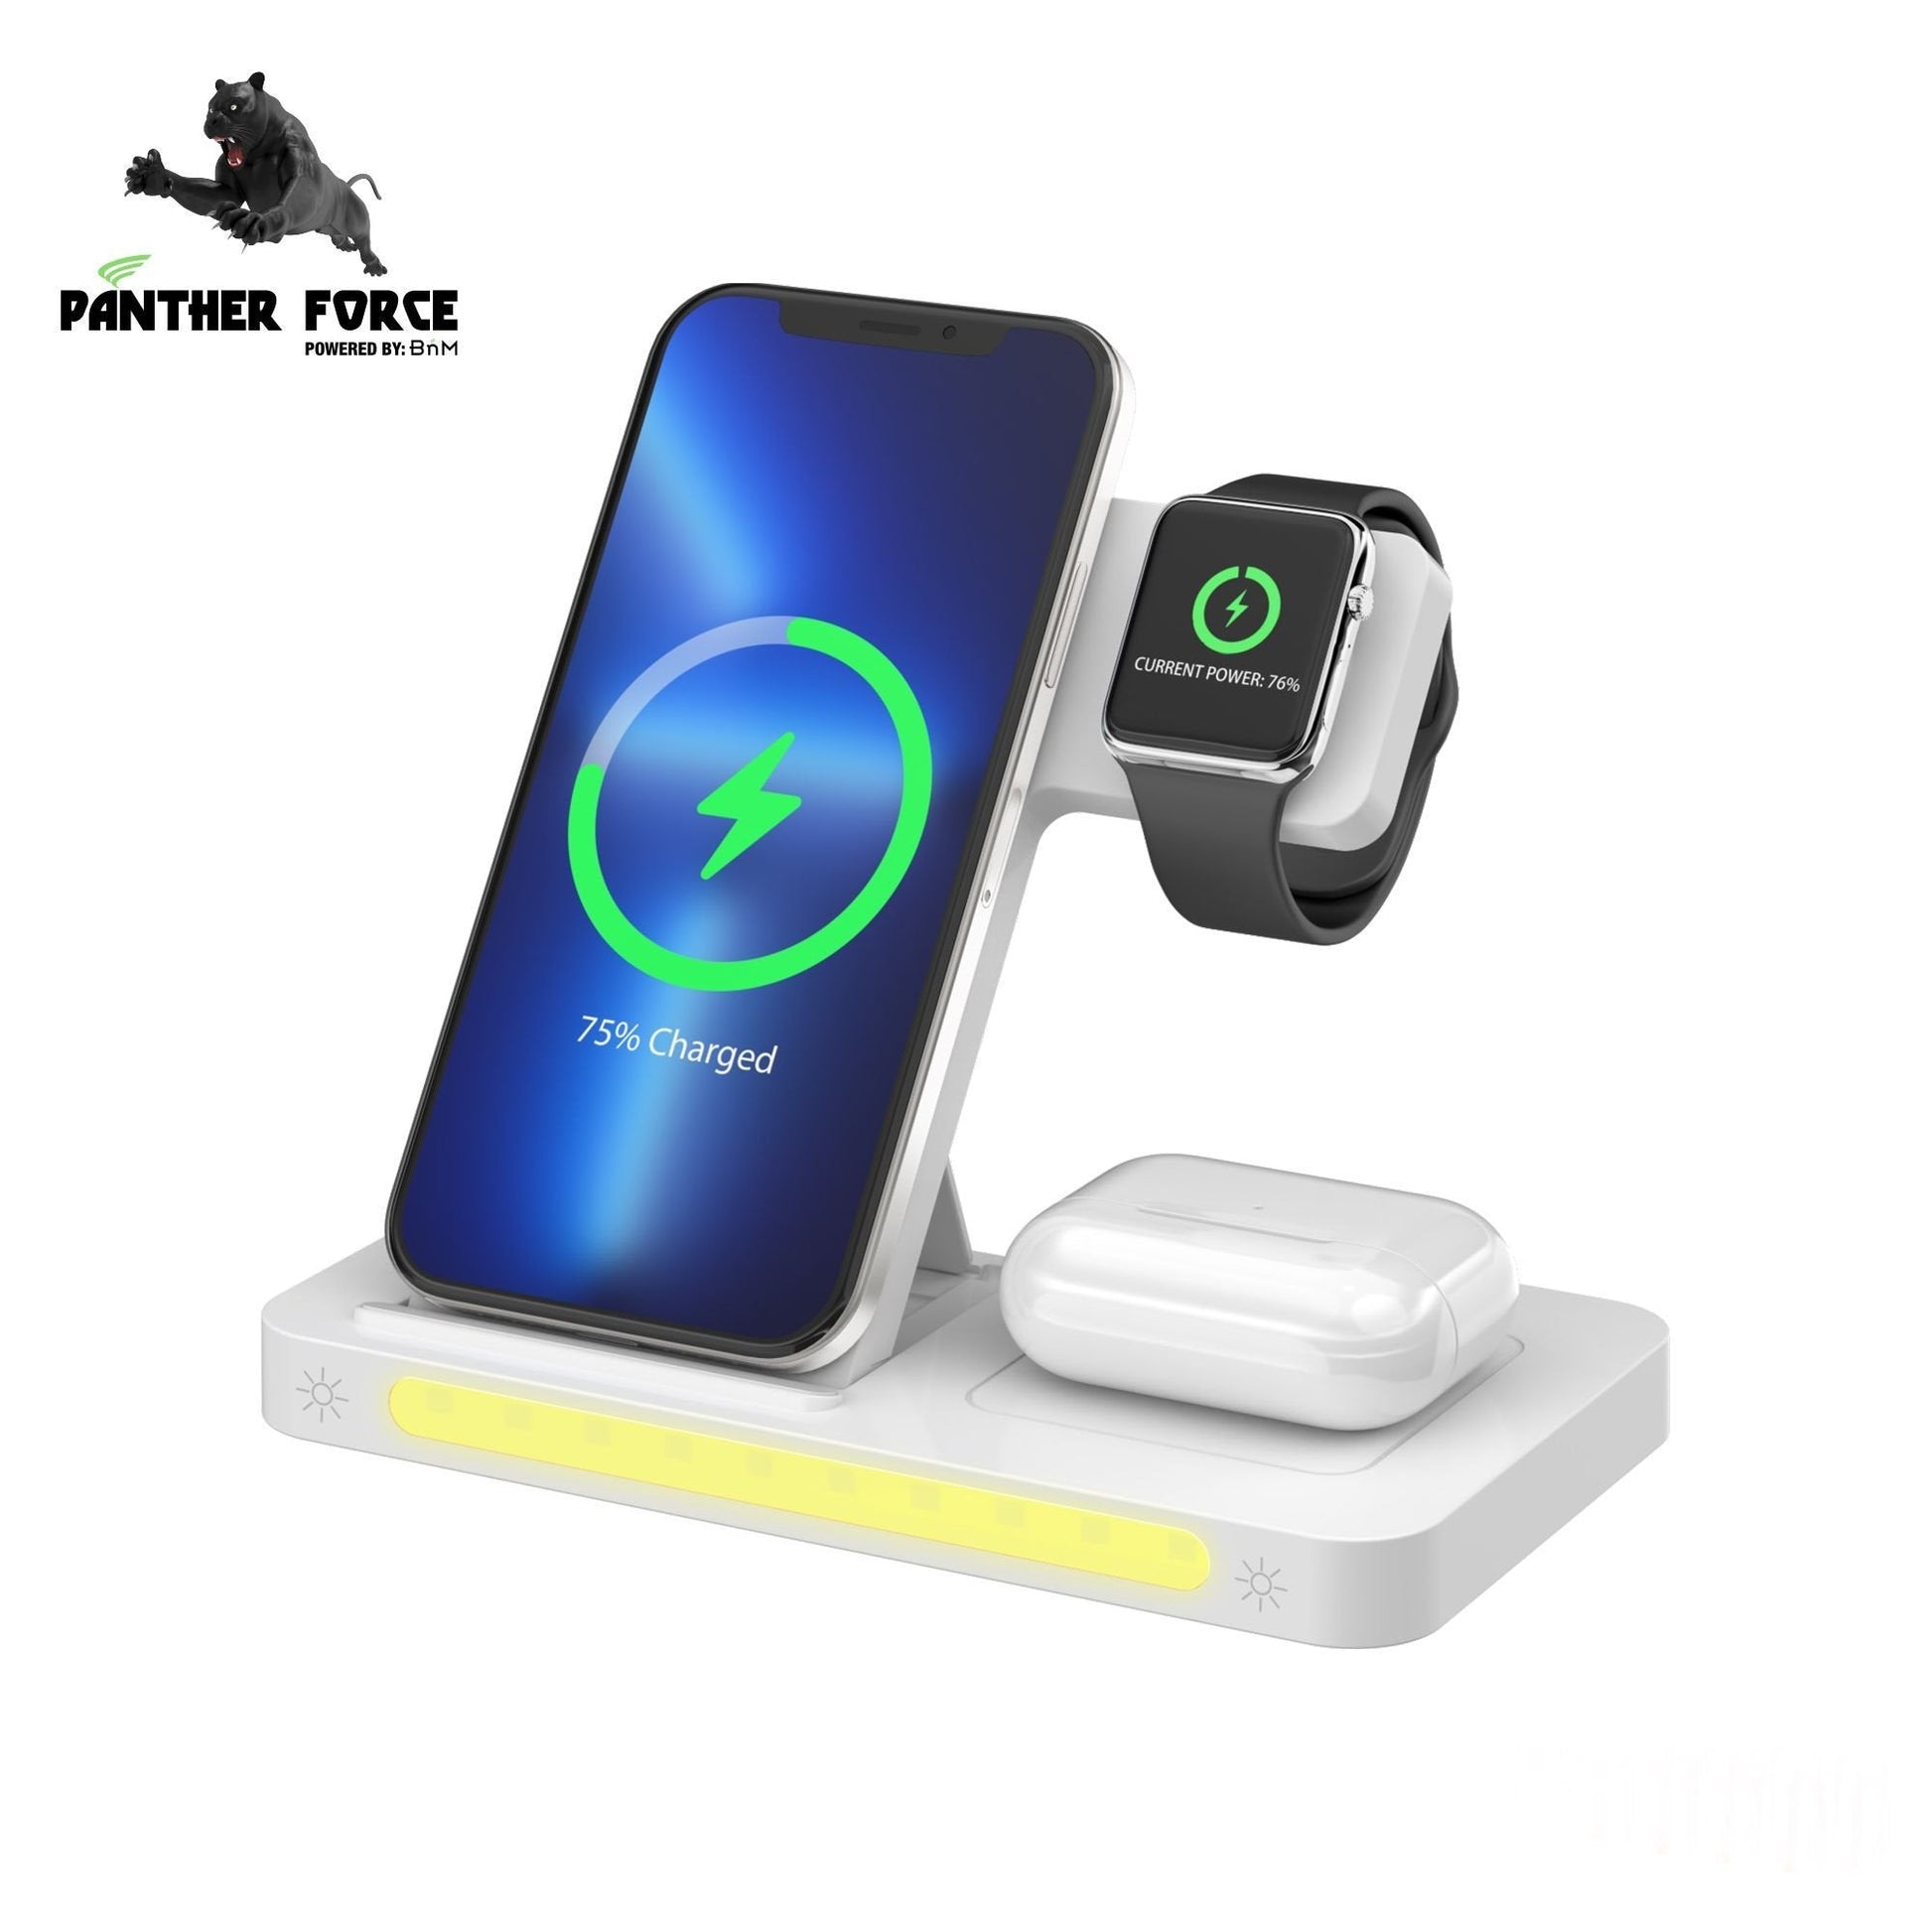 3-in-1 Panther Force Wireless Charging Stand with LED Light, Wireless  Charger for Mobile Phone 15W, SmartWatch 5W and Wireless enabled Earbuds 3W